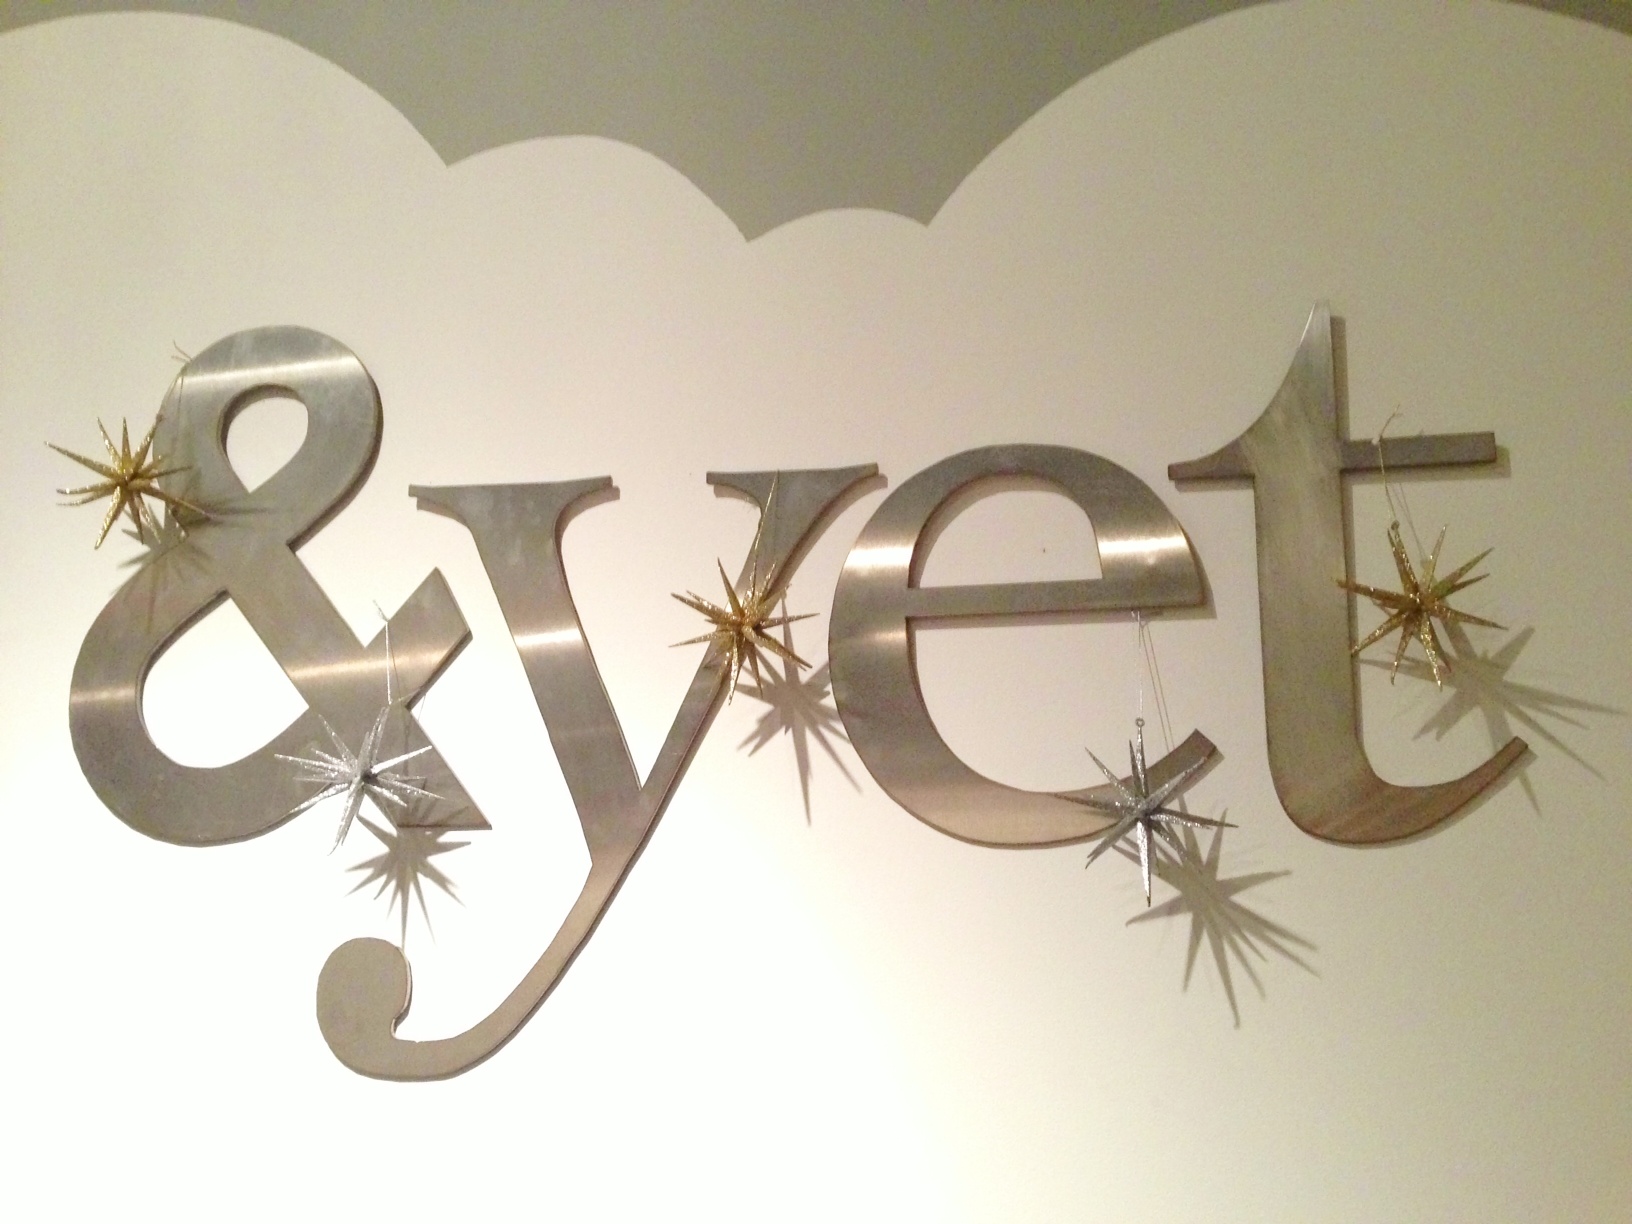 the &yet office logo decorated with ornaments